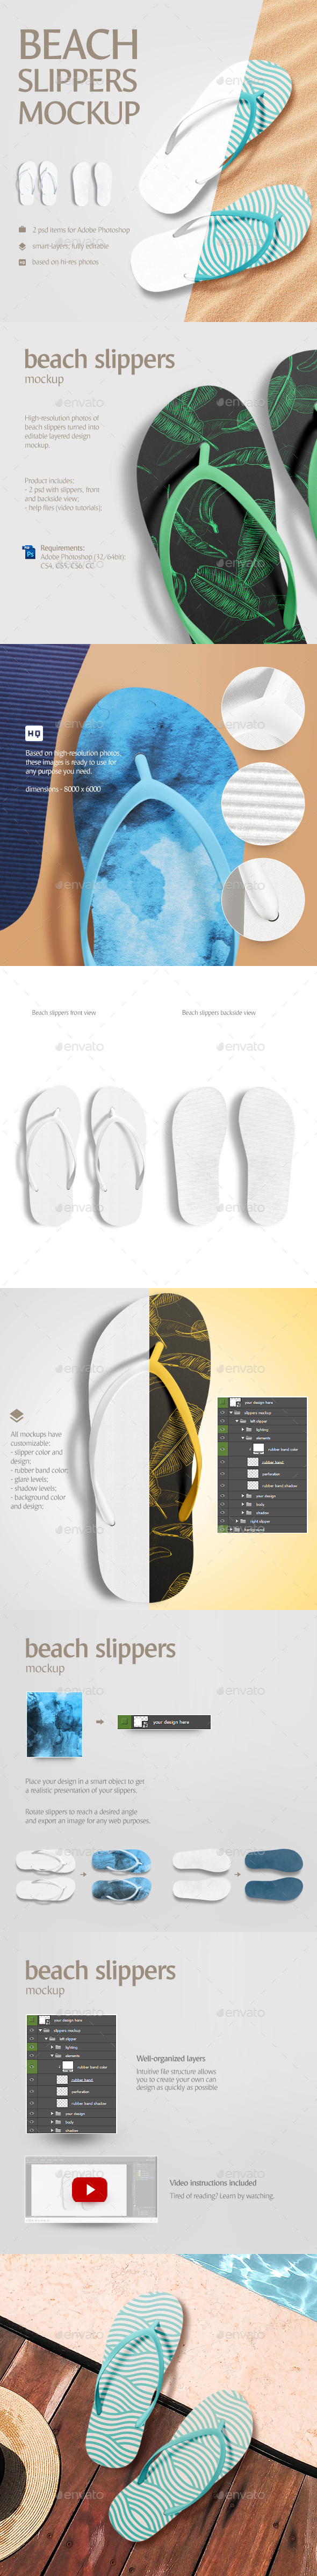 GraphicRiver Beach Slippers Mockup 20942764